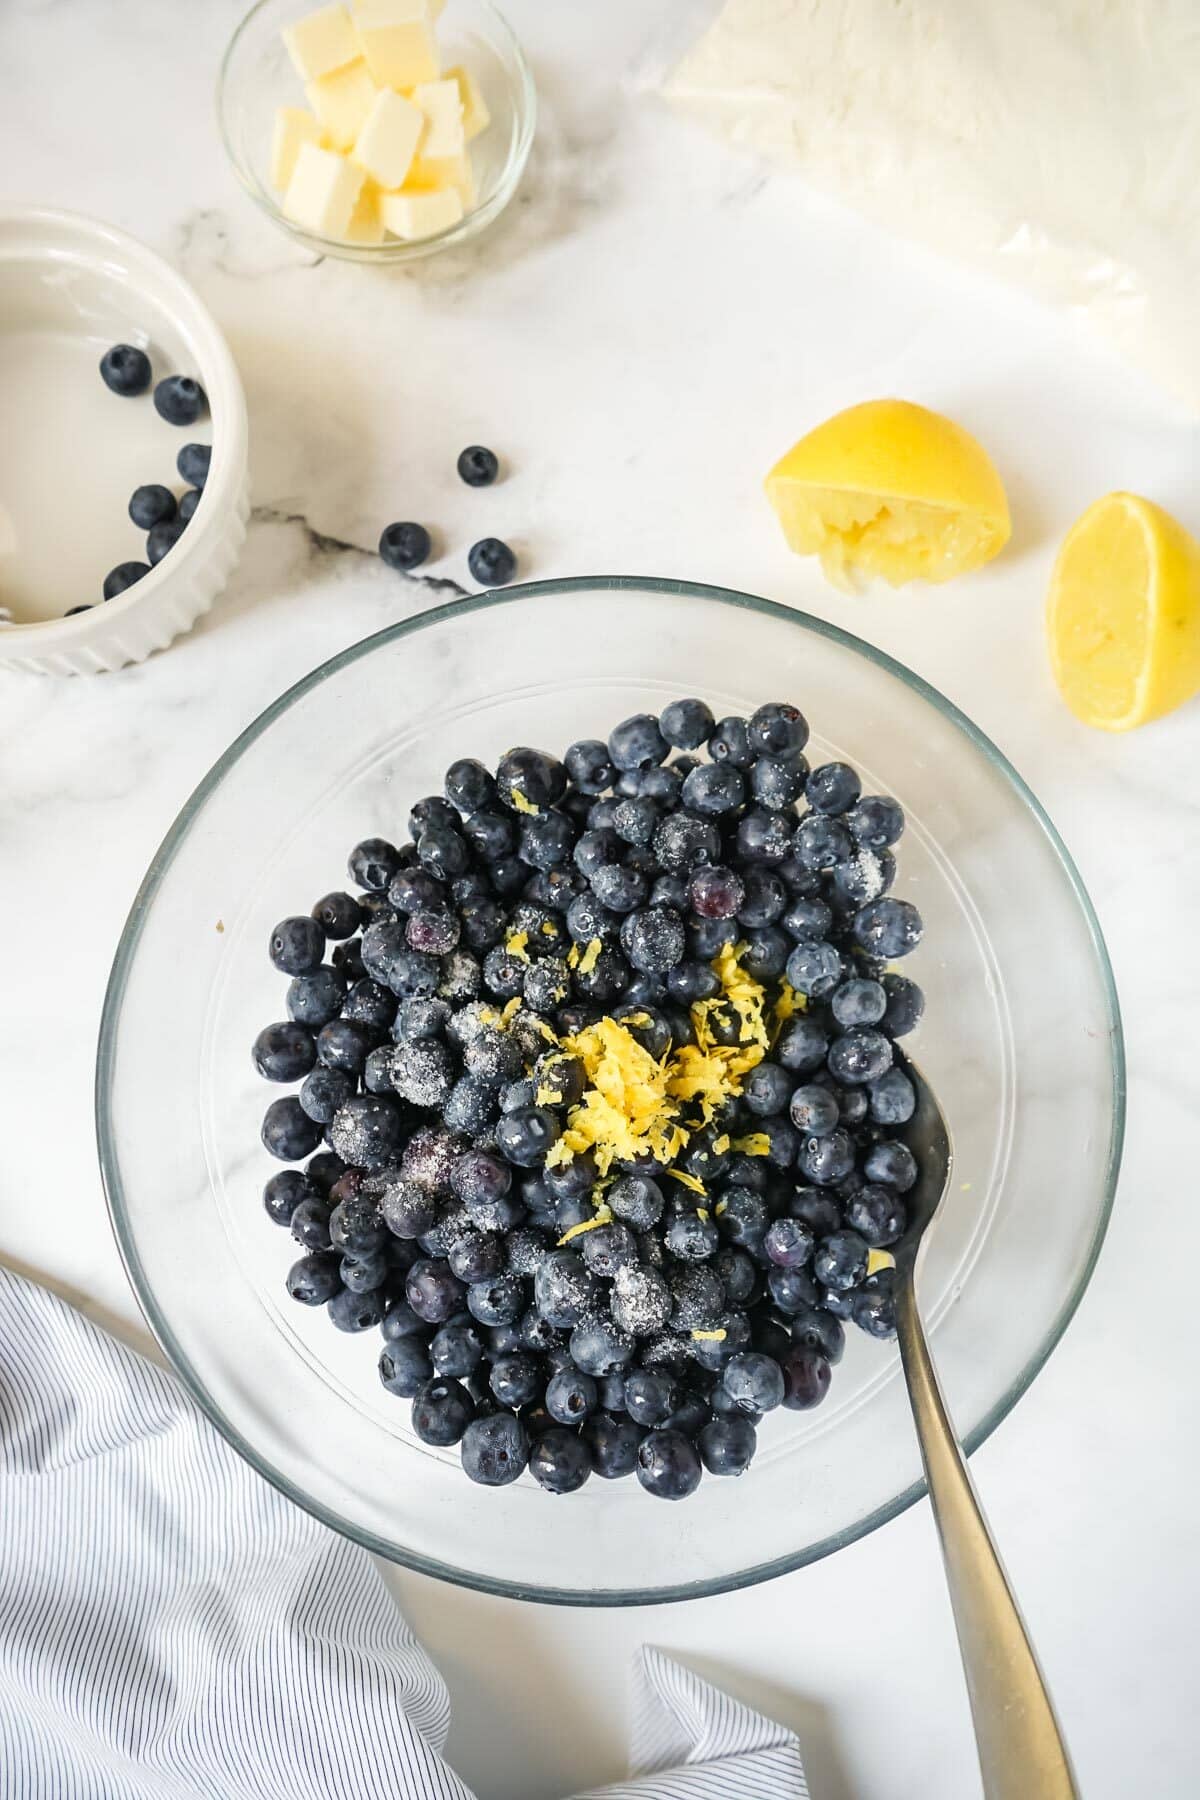 Blueberries, lemon juice, zest and sugar in a small bowl.